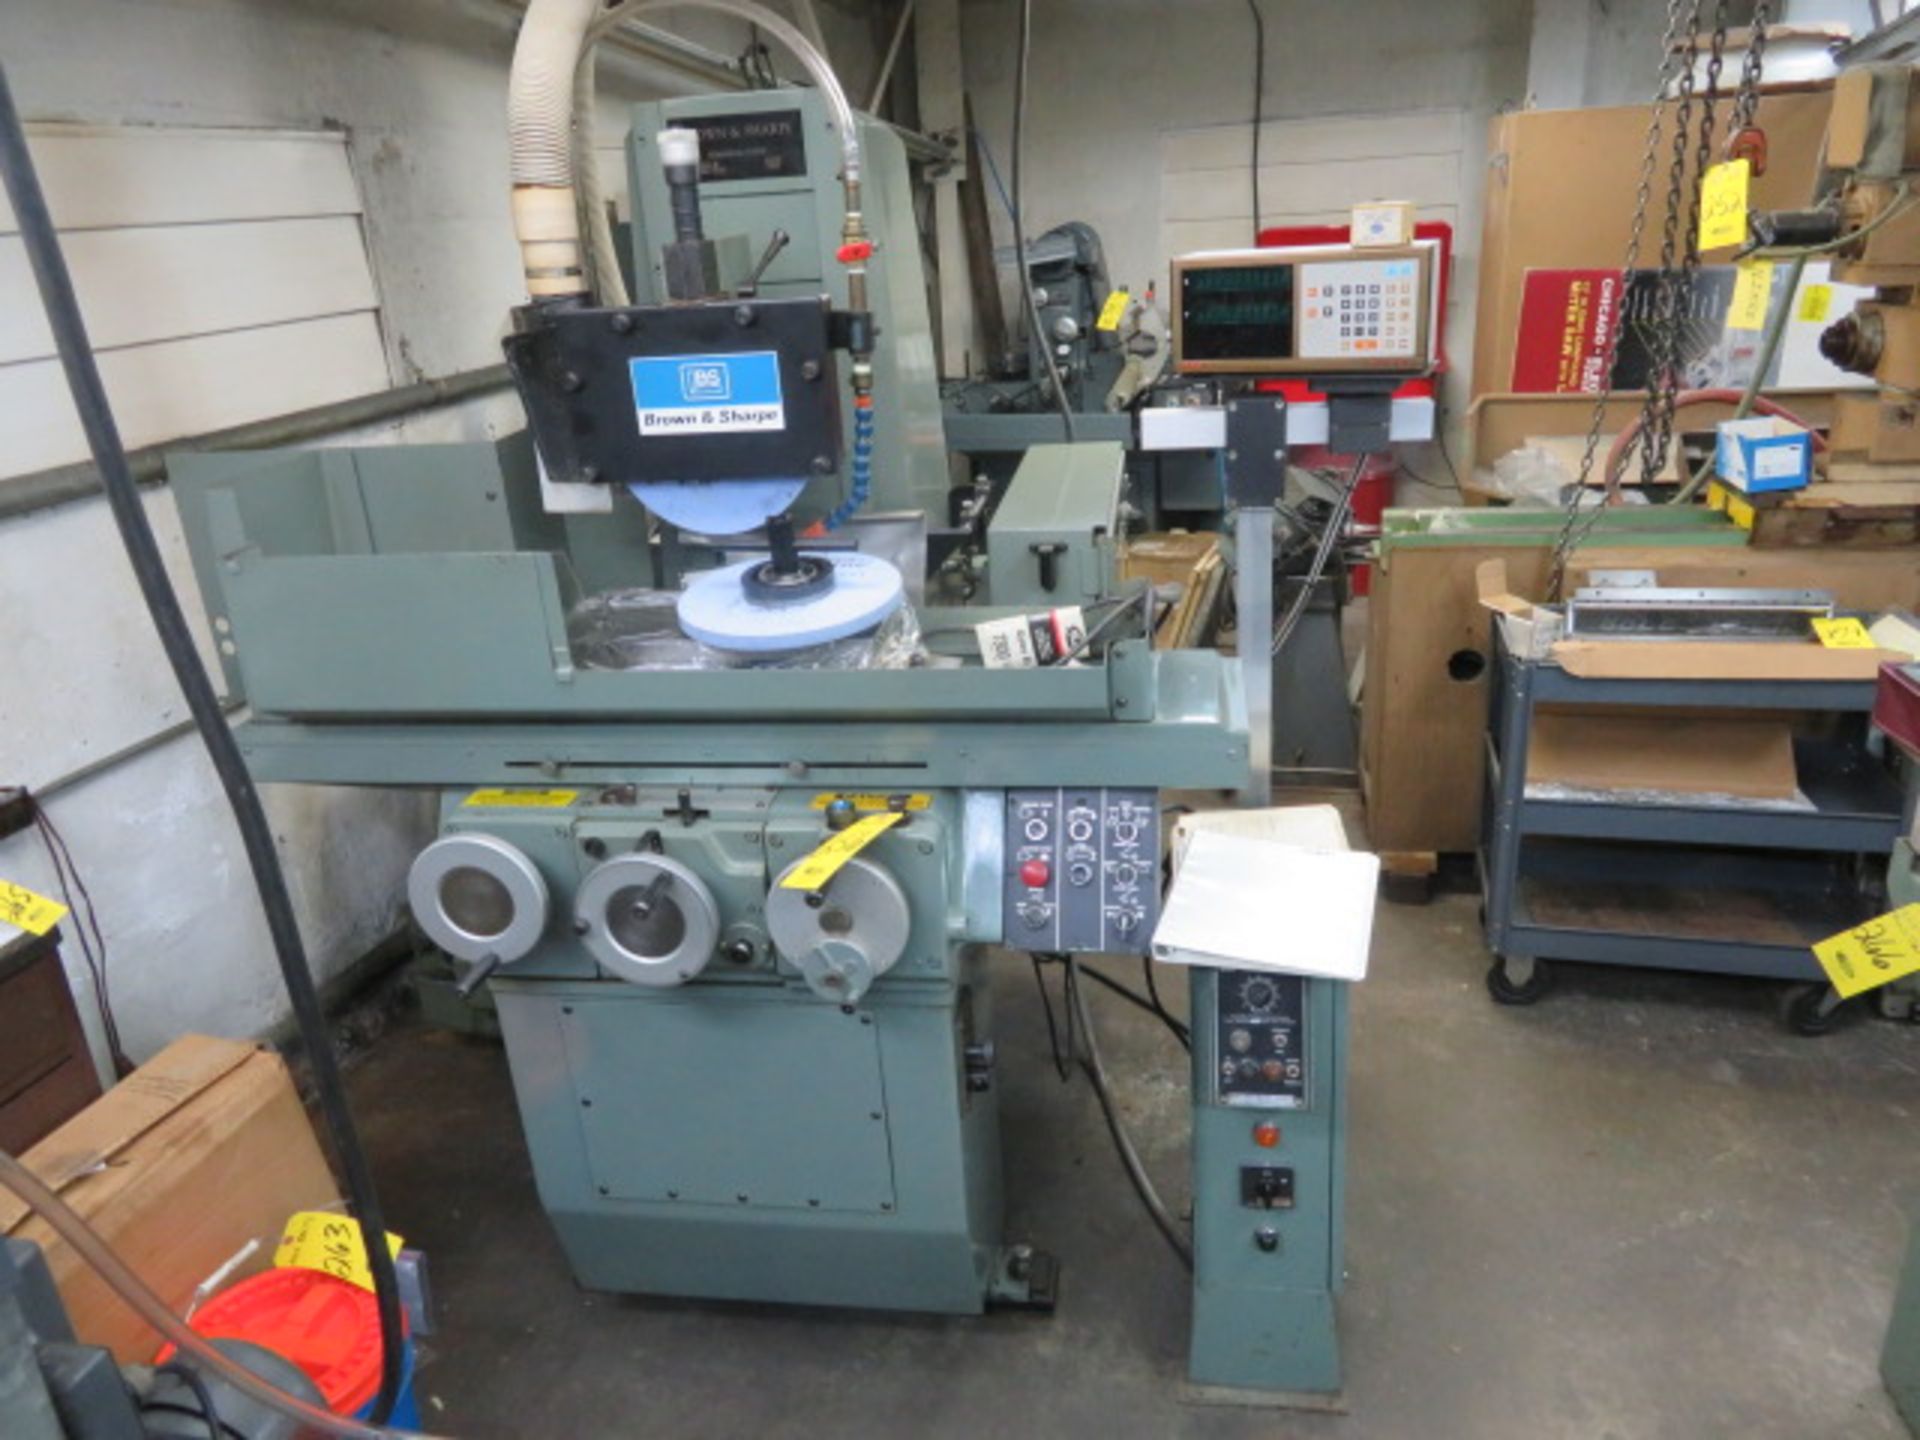 BROWN & SHARPE MICROMASTER 818 HYDRAULIC SURFACE GRINDER, S/N…PLUS $200 RIGGING & LOADING FEE